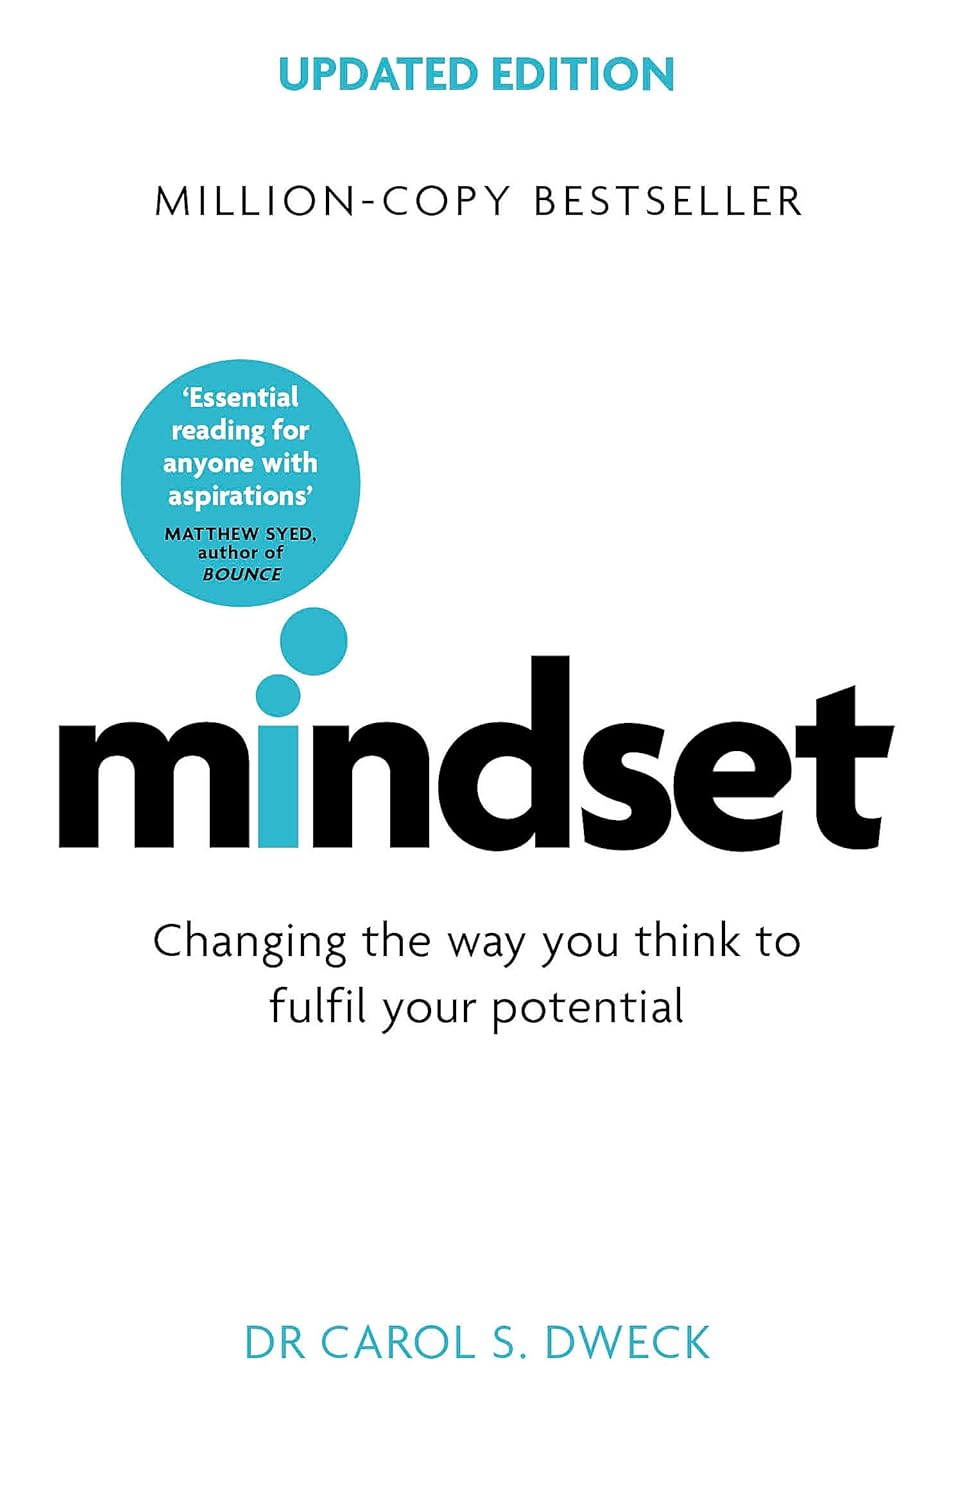 Dr. Carol S. Dweck - Mindset - Updated Edition. Changing The Way You think To Fulfil Your Potential